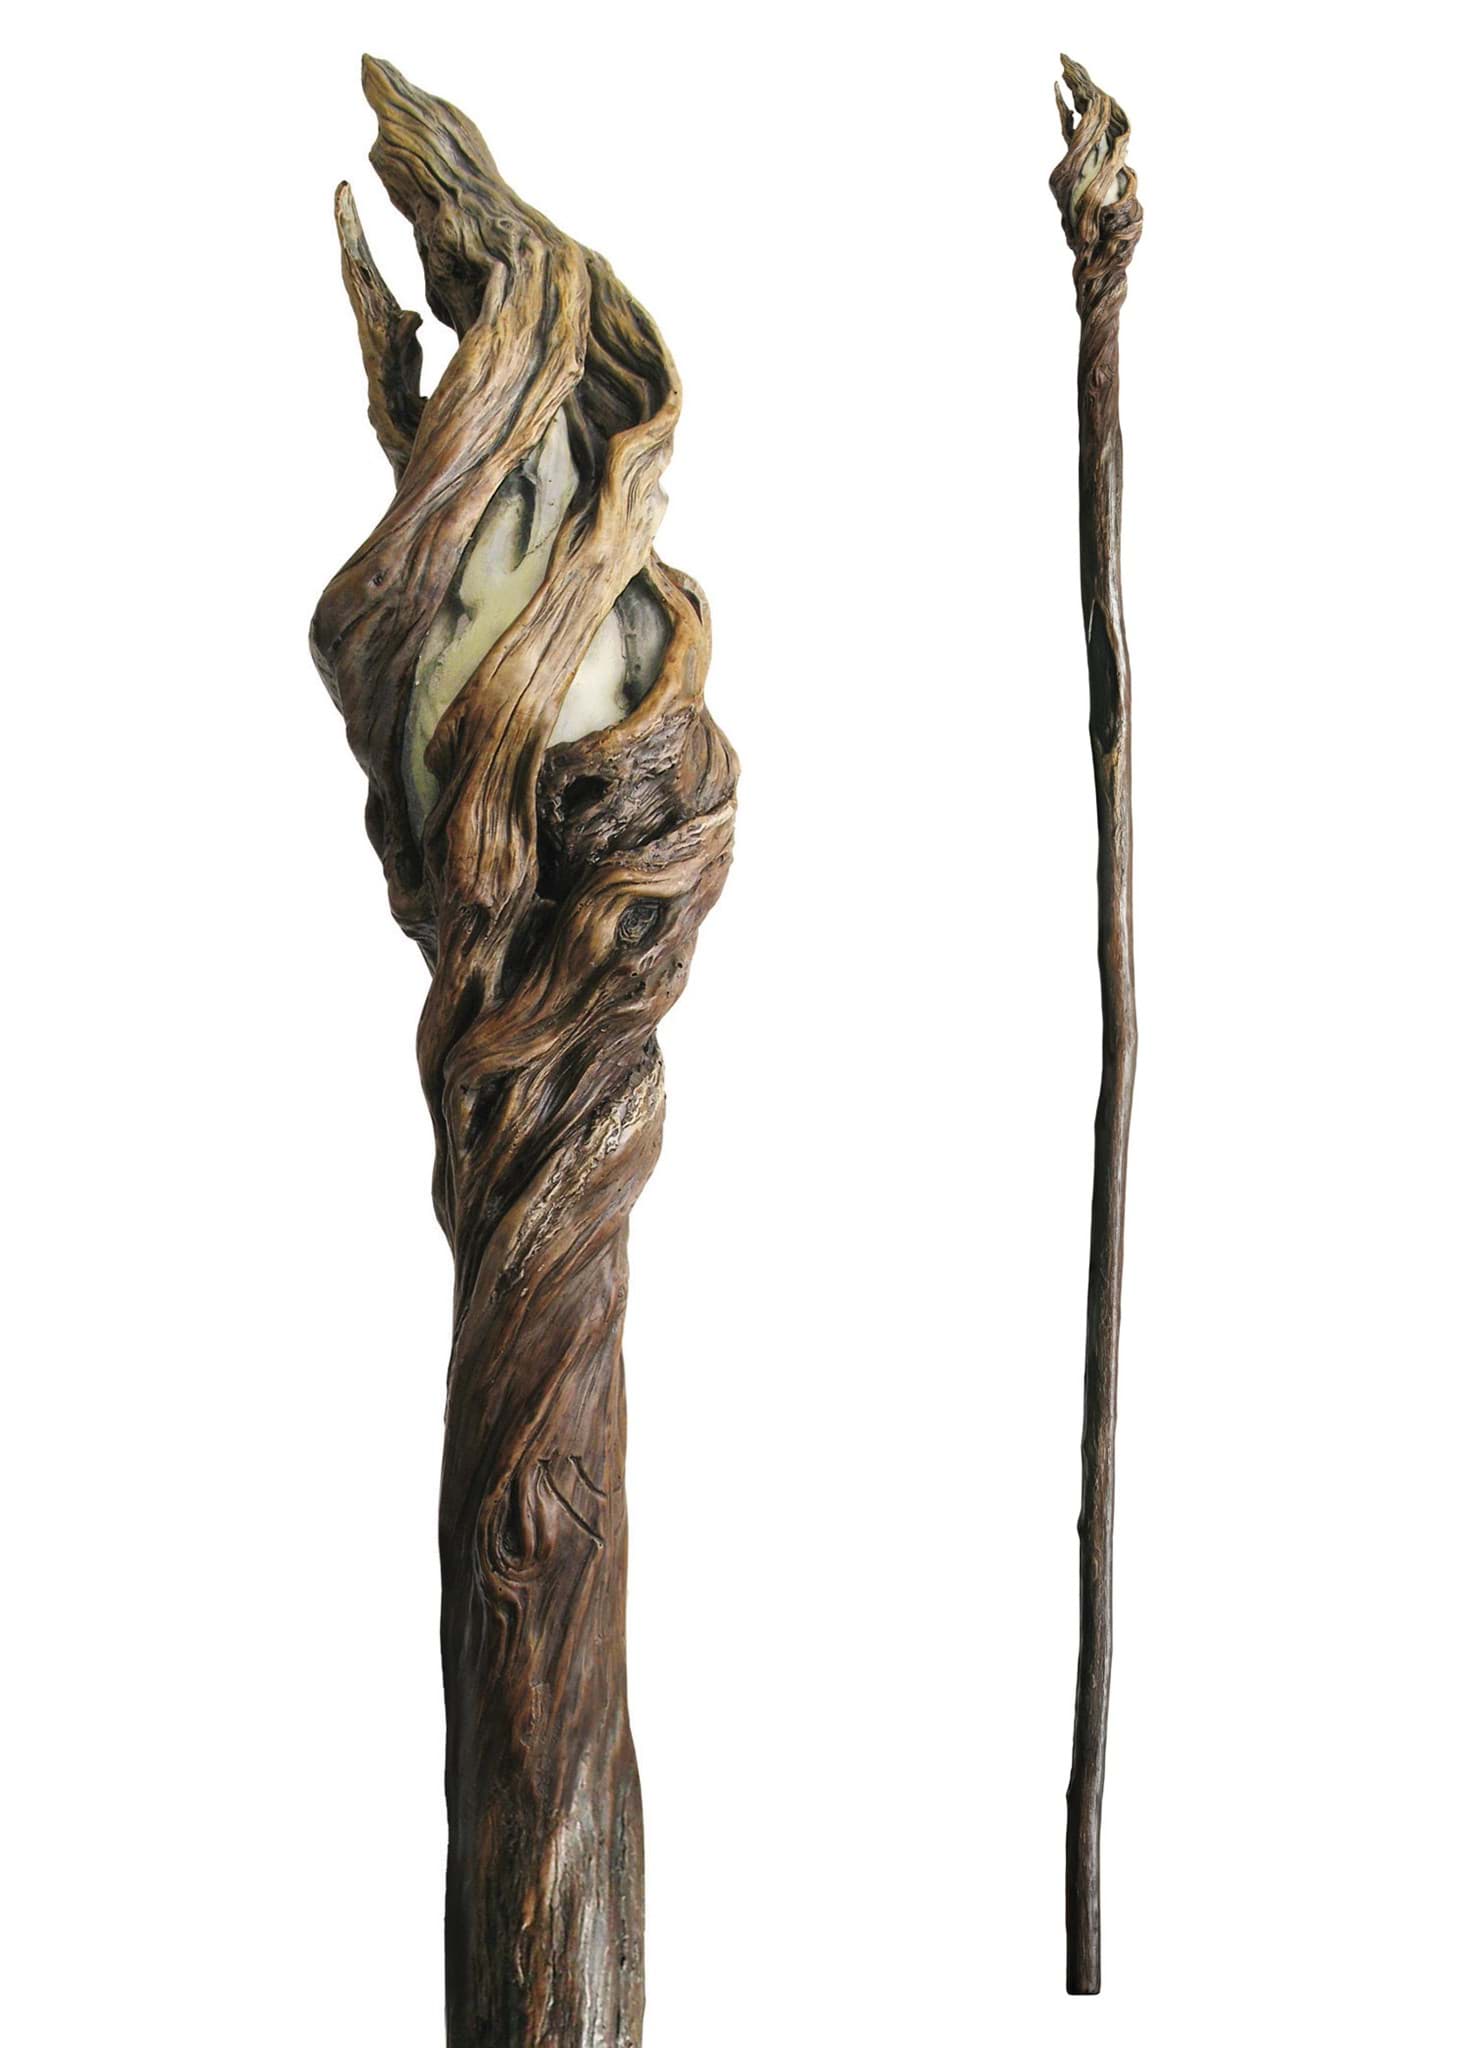 Picture of The Hobbit - Gandalf the Wizard's Staff of Light